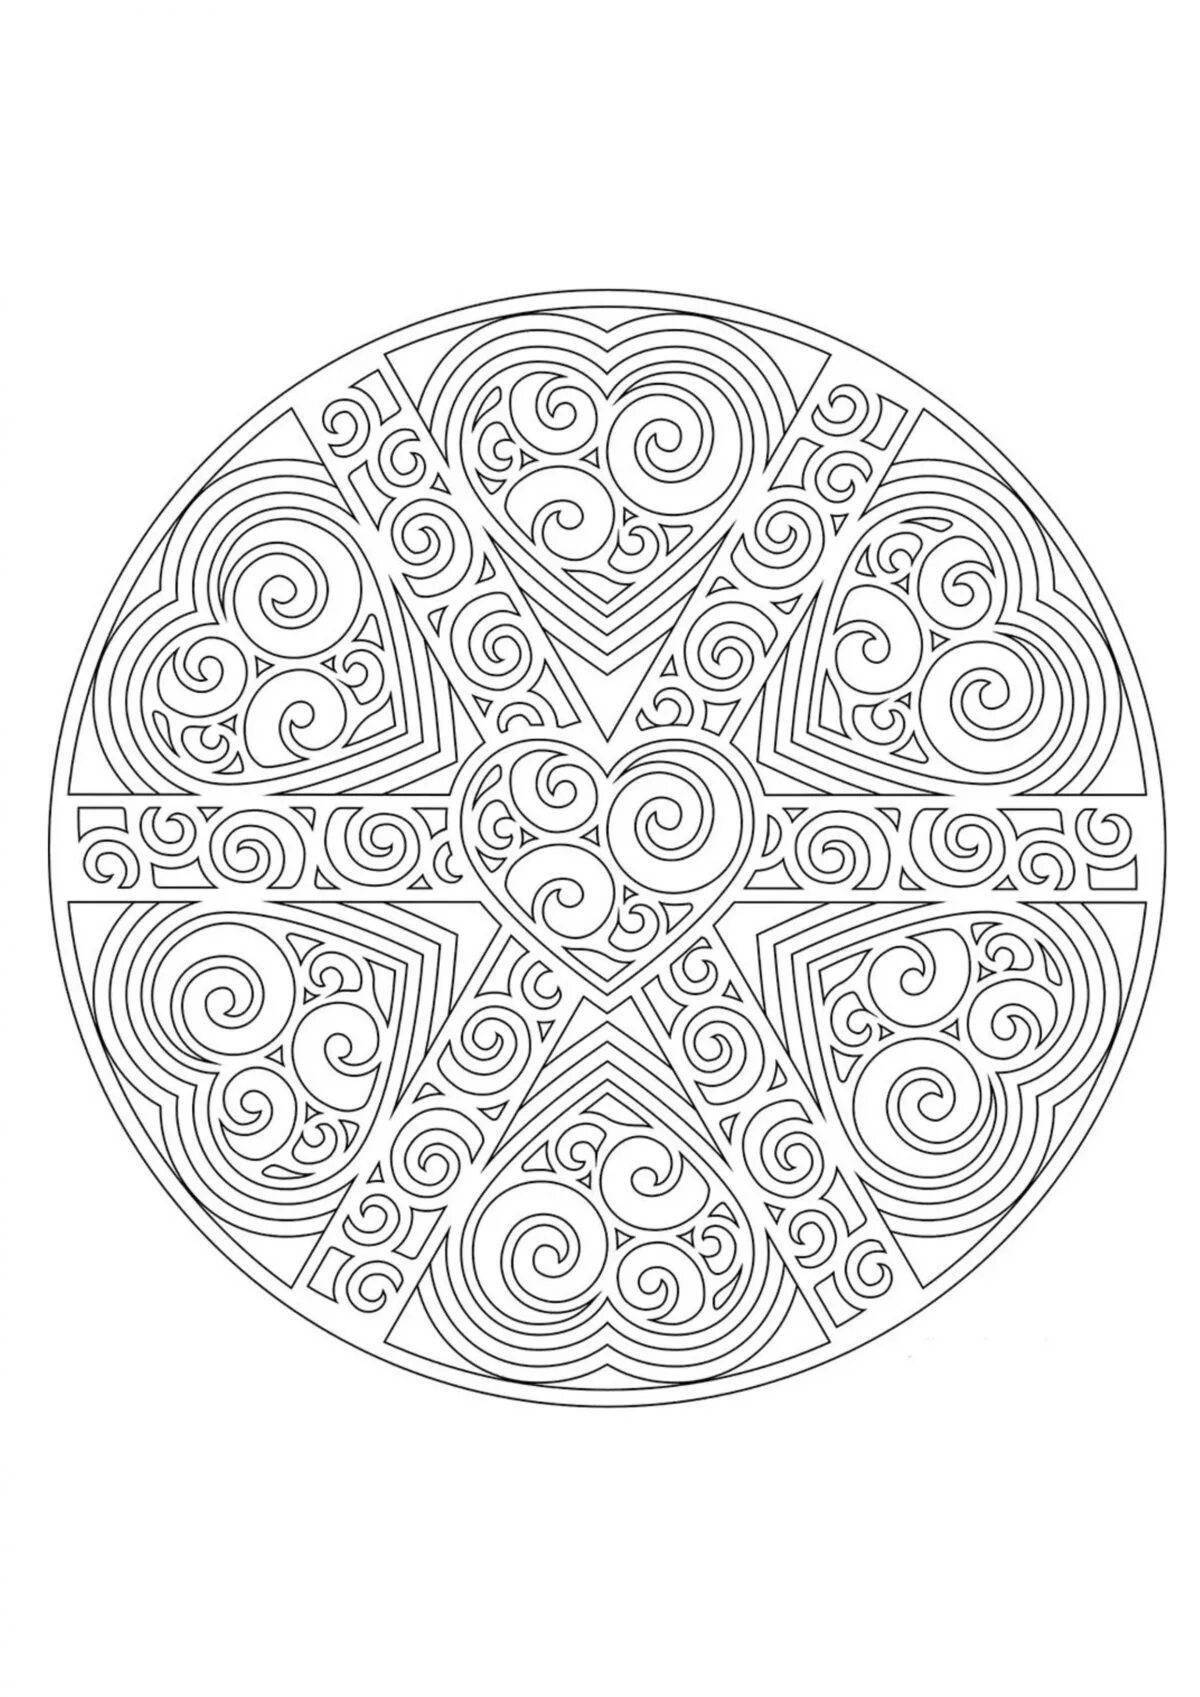 Great anti-stress round coloring book